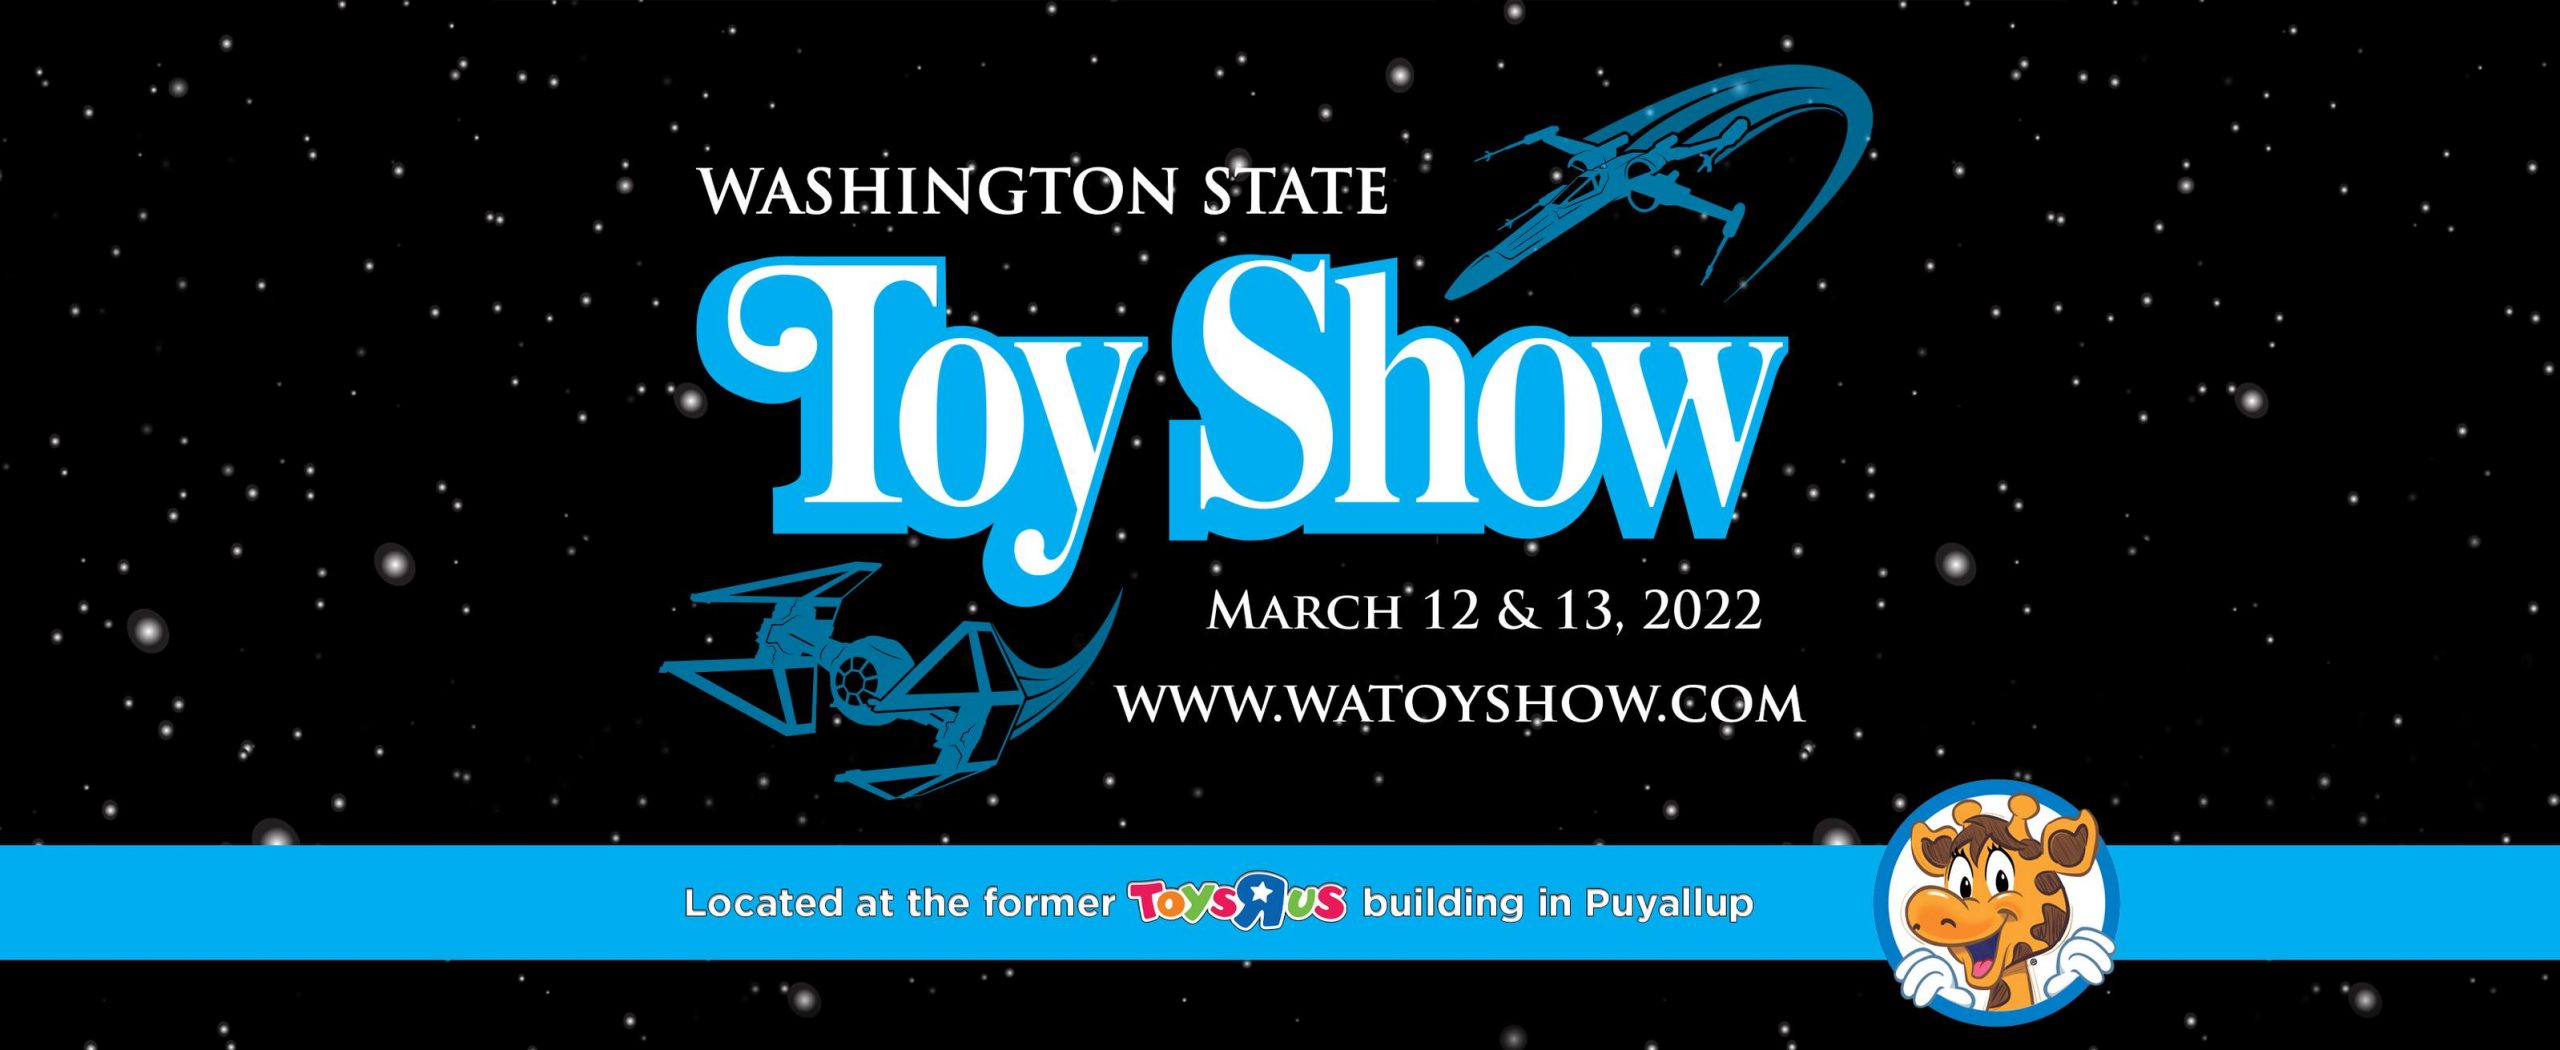 Washington State Toy Show – March ’22